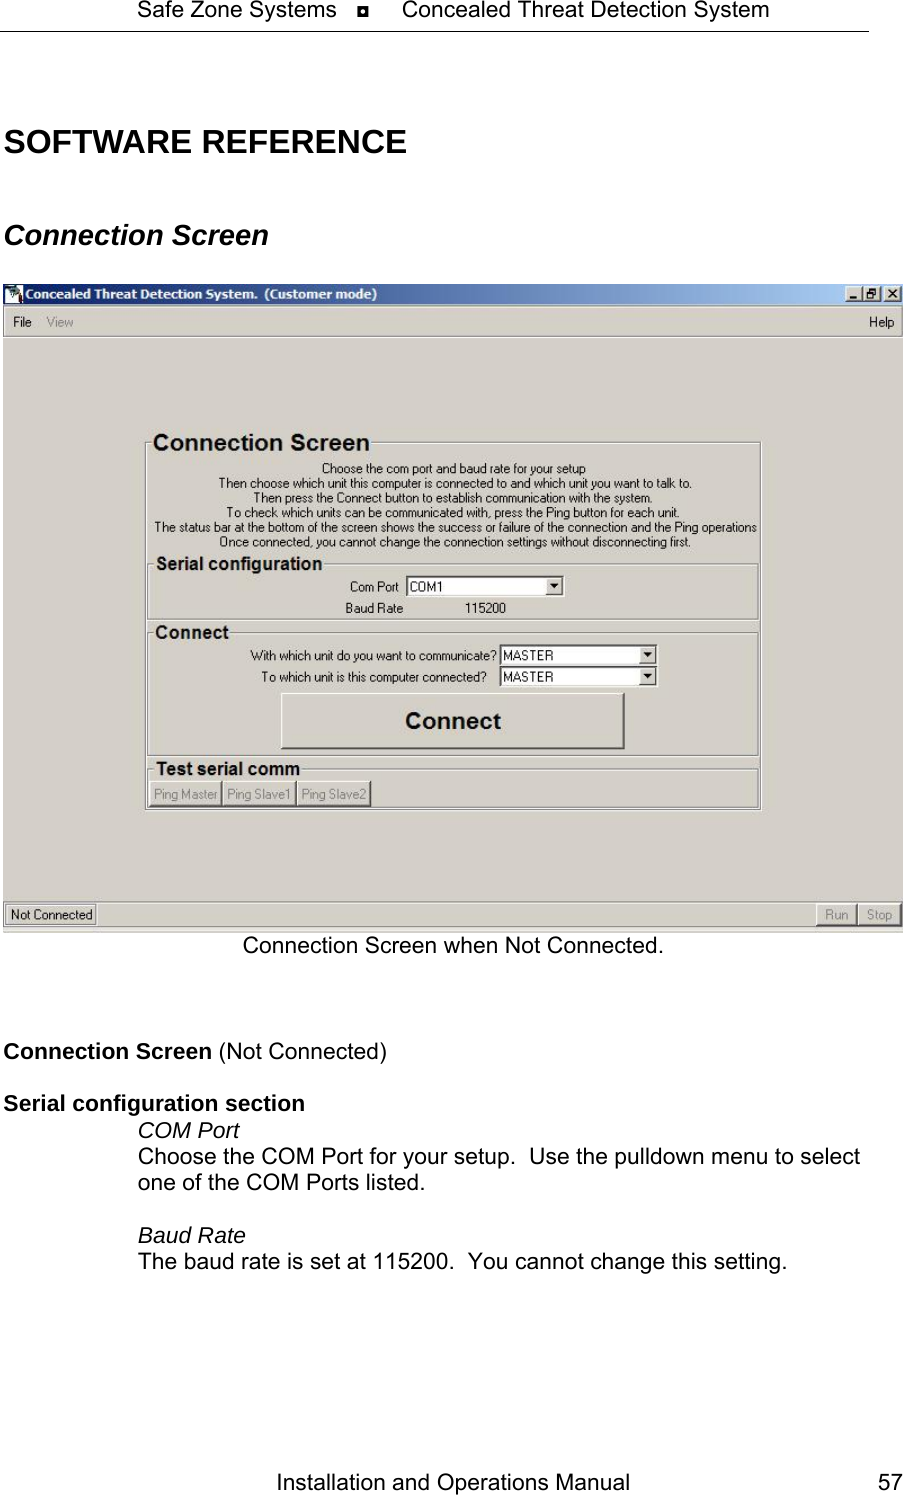 Safe Zone Systems   ◘     Concealed Threat Detection System   SOFTWARE REFERENCE  Connection Screen   Connection Screen when Not Connected.    Connection Screen (Not Connected)  Serial configuration section  COM Port   Choose the COM Port for your setup.  Use the pulldown menu to select   one of the COM Ports listed.    Baud Rate   The baud rate is set at 115200.  You cannot change this setting. Installation and Operations Manual  57